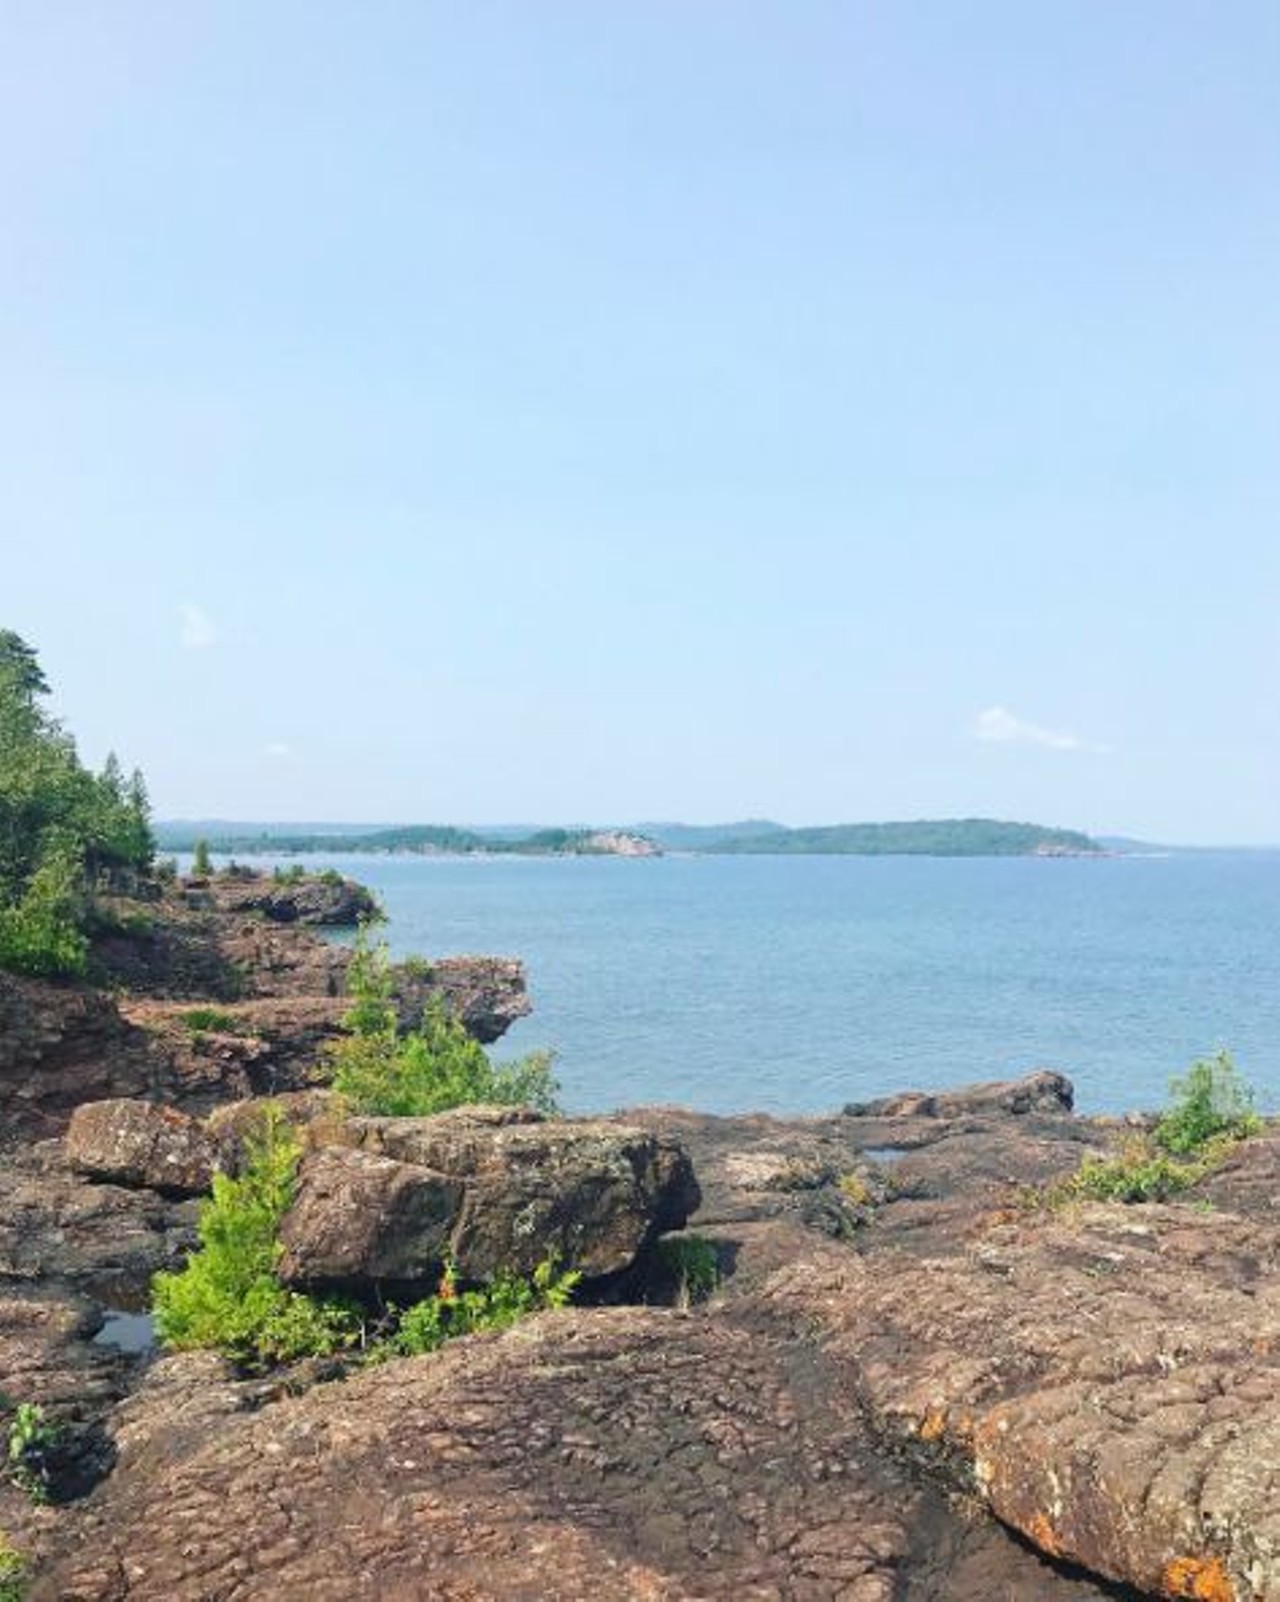 Black Rock Beach
Marquette; 7 hours, 8 minutes
This scenic shoreline is nestled between two cliffs within Presque Isle Park. Take a dive, or admire the beach&#146;s impressive collection of Lake Superior stones. Free for day trips.
Photo via IG user @drusillafish